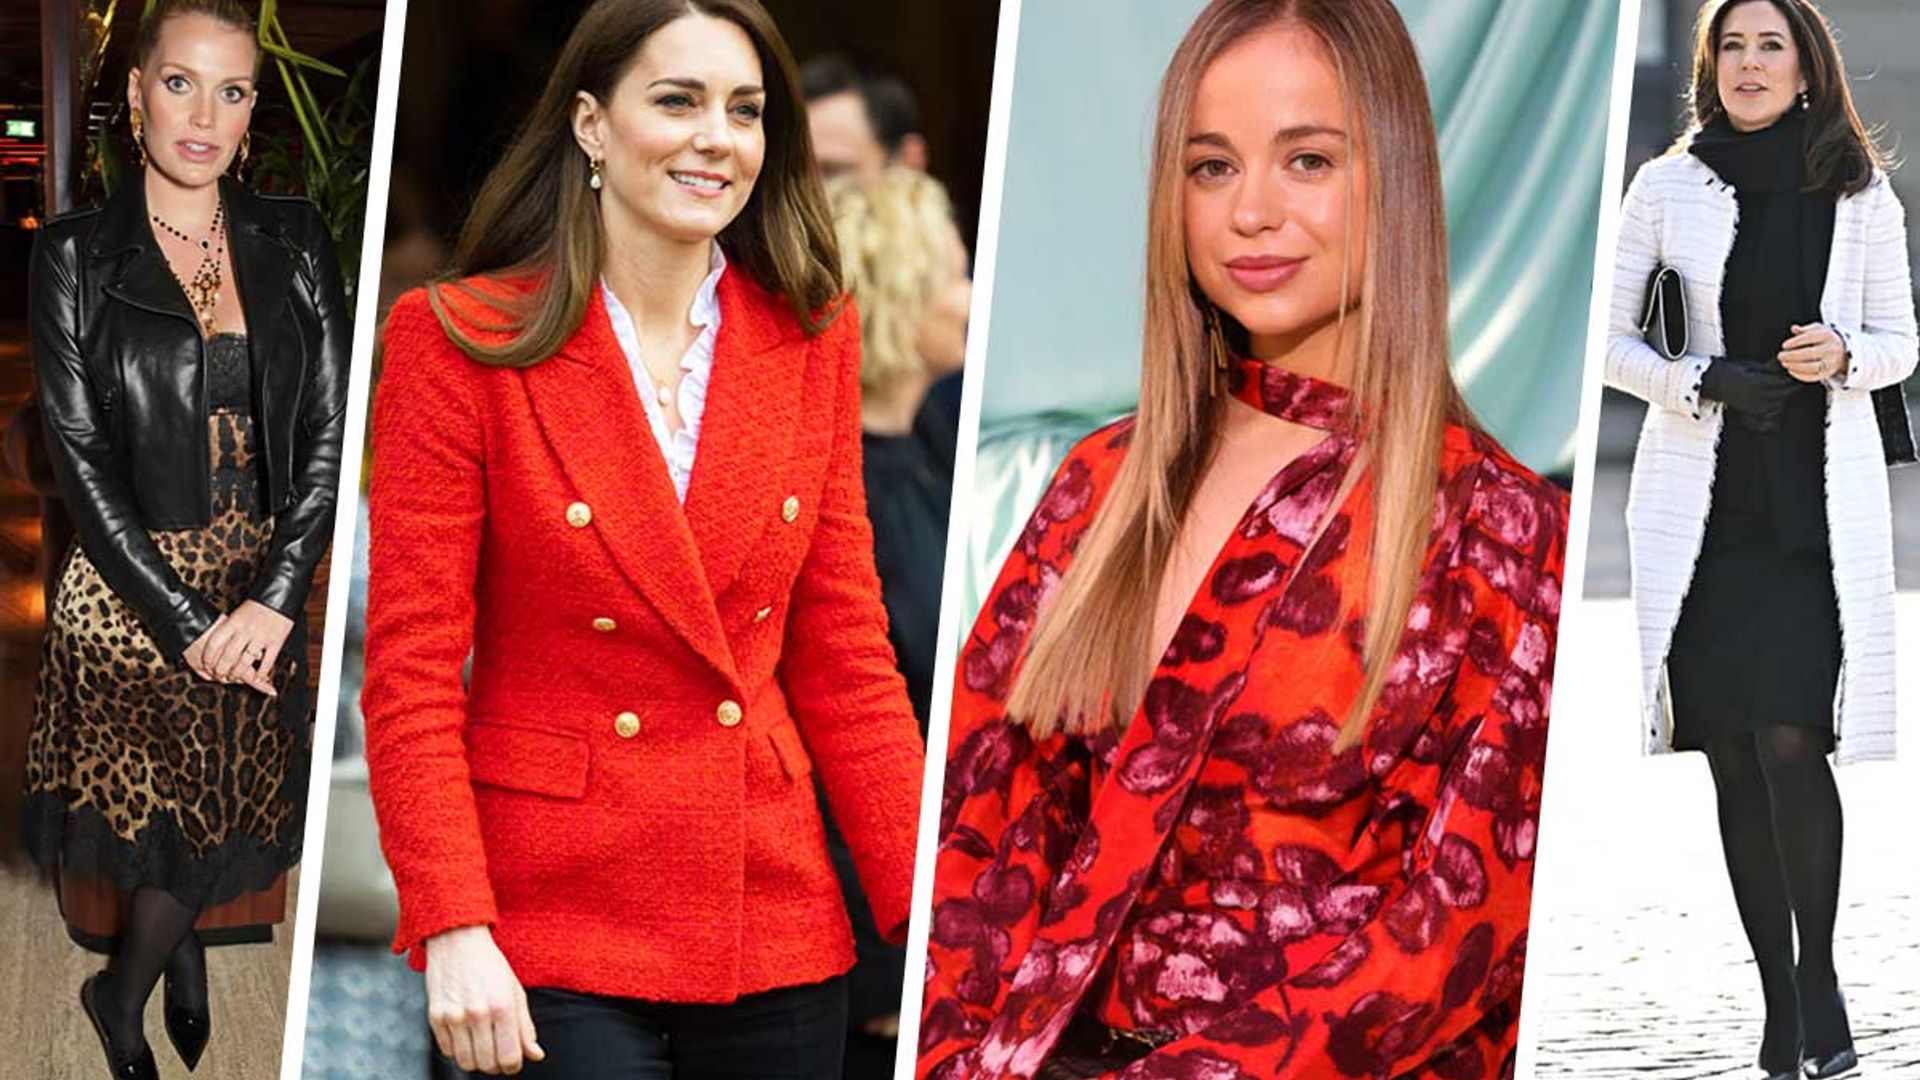 Royal Style Watch: From Kate Middleton's must-see Zara blazer to Lady Kitty Spencer's lace slip